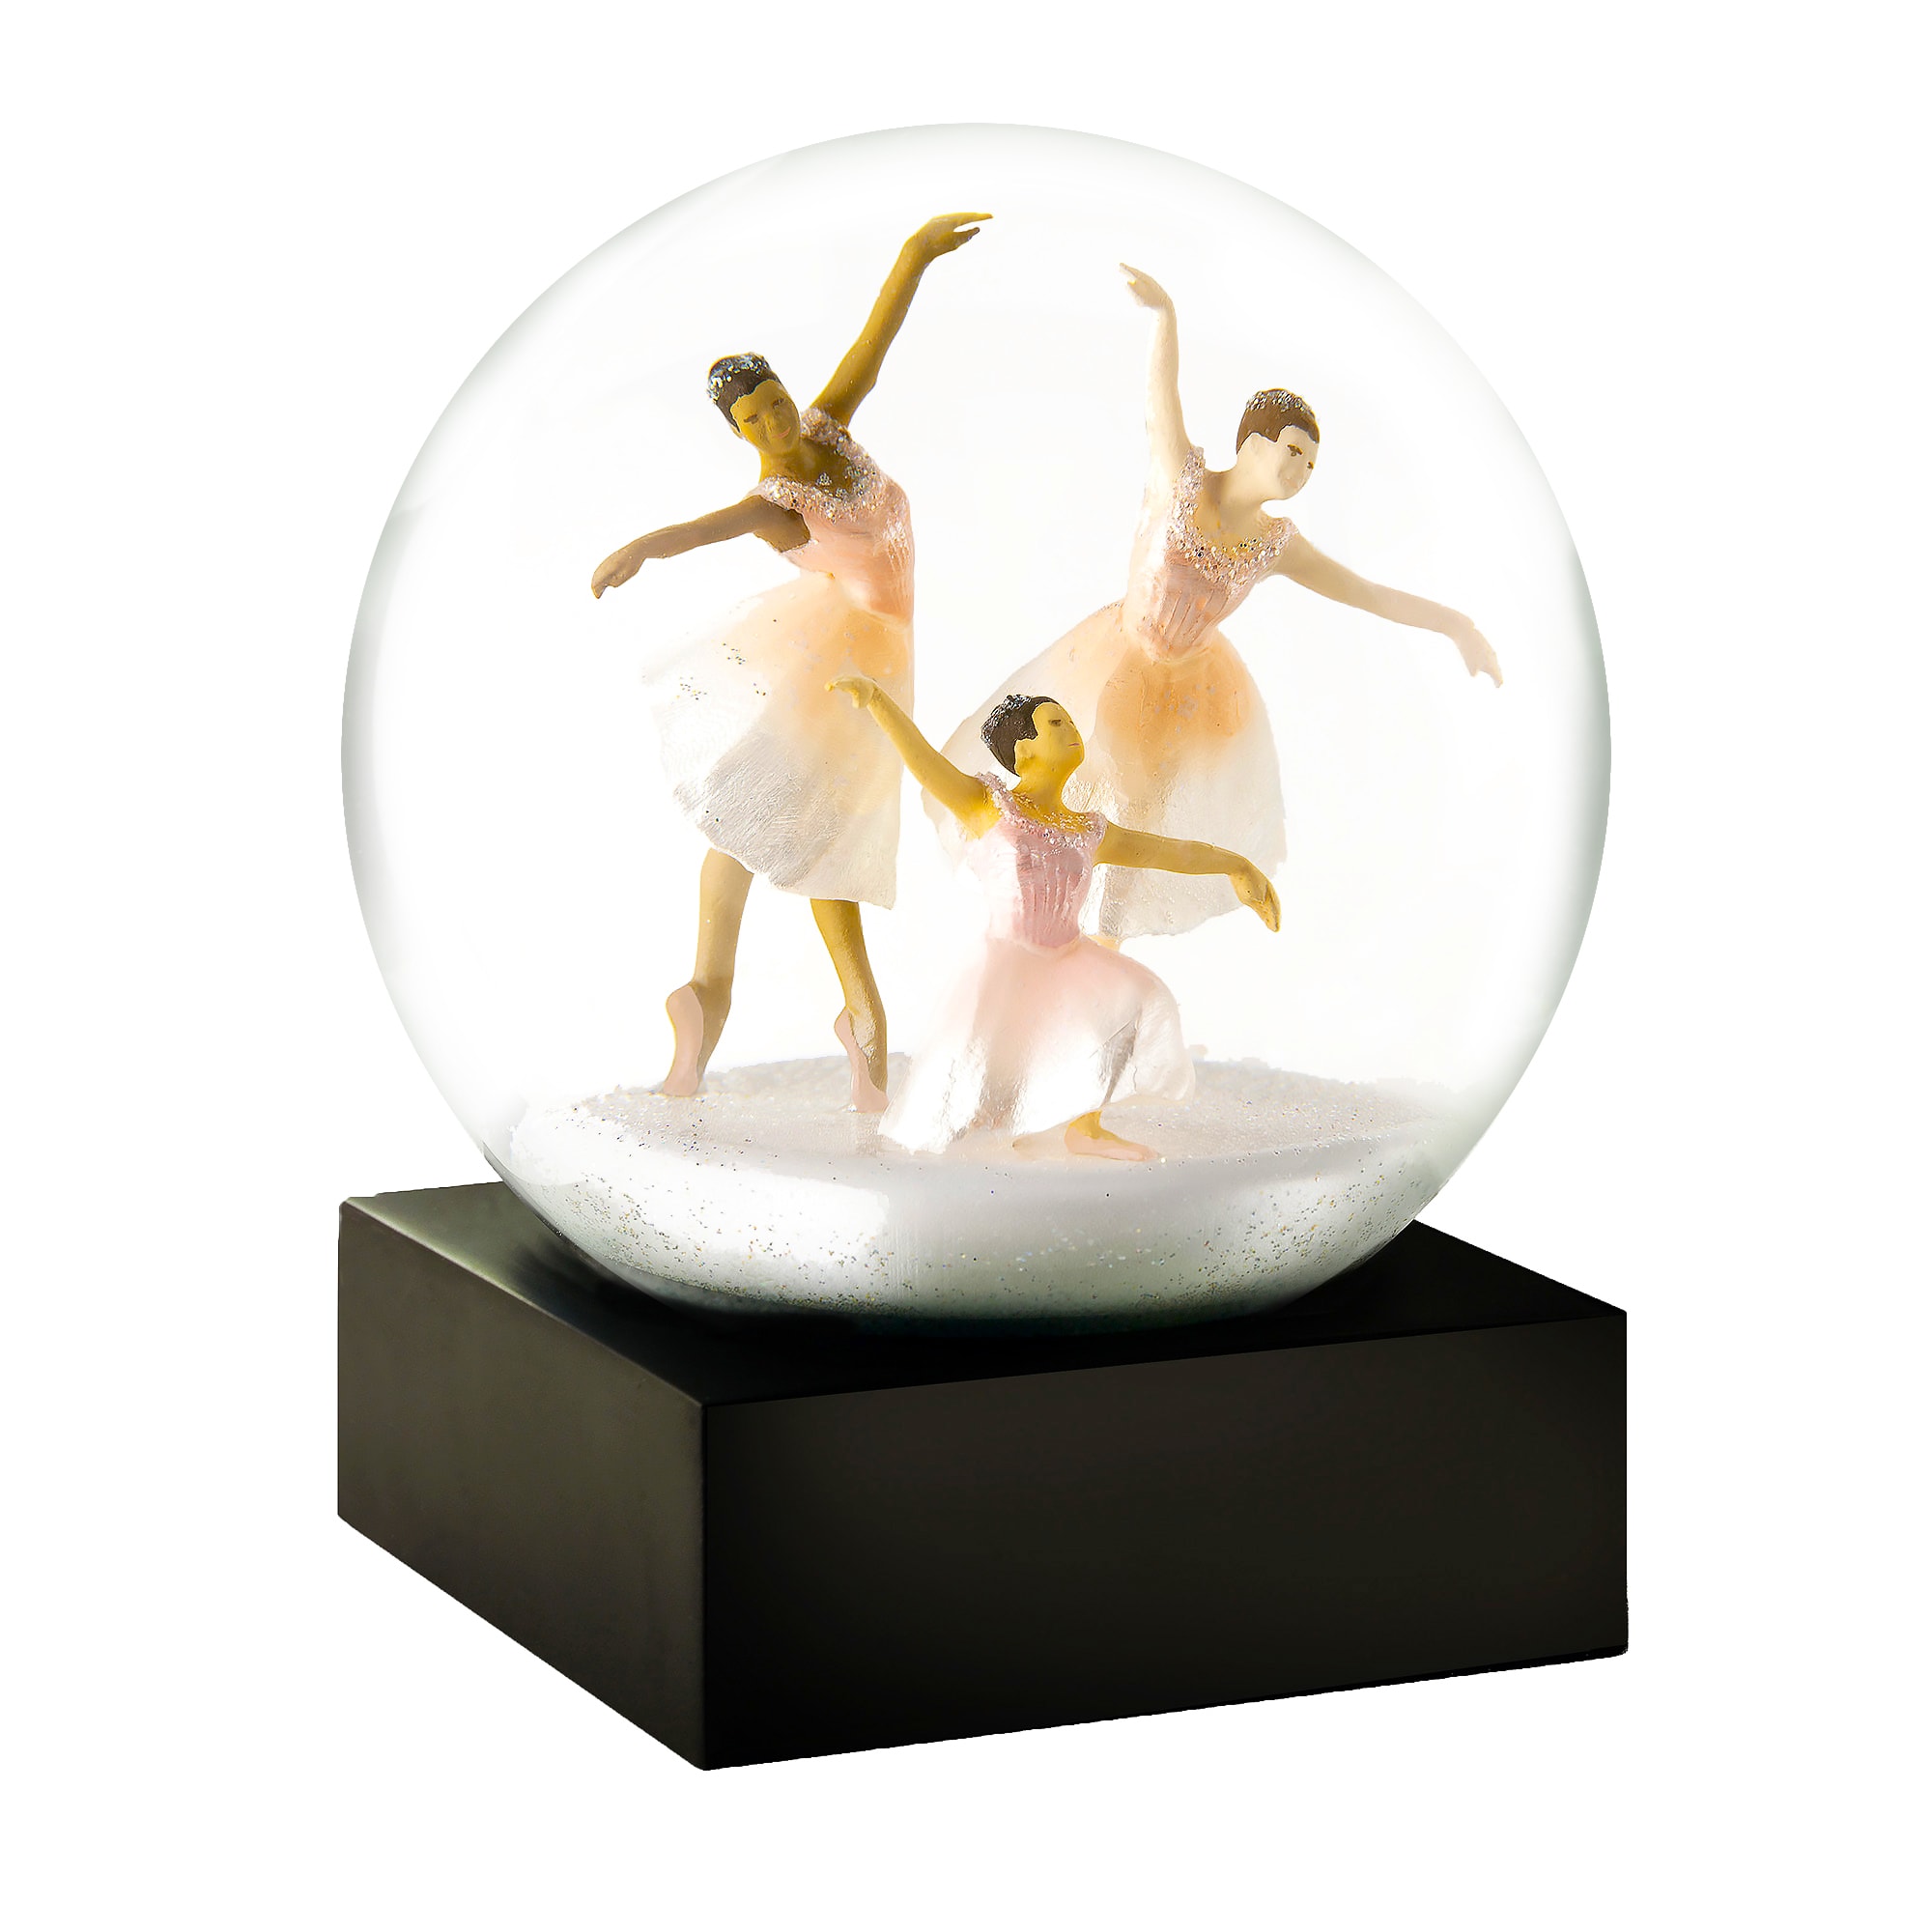 3 Dancers Snow Globe - Reminiscent of another illustrious trio, the Three Graces, these dancers epitomize elegance, beauty, and delight. Emerging from a sparkling flurry, the ballerinas are poised to take off and move gracefully to the Nutcracker’s Dance of the Reed Flute—or perhaps just the faint percussion of the falling snow.